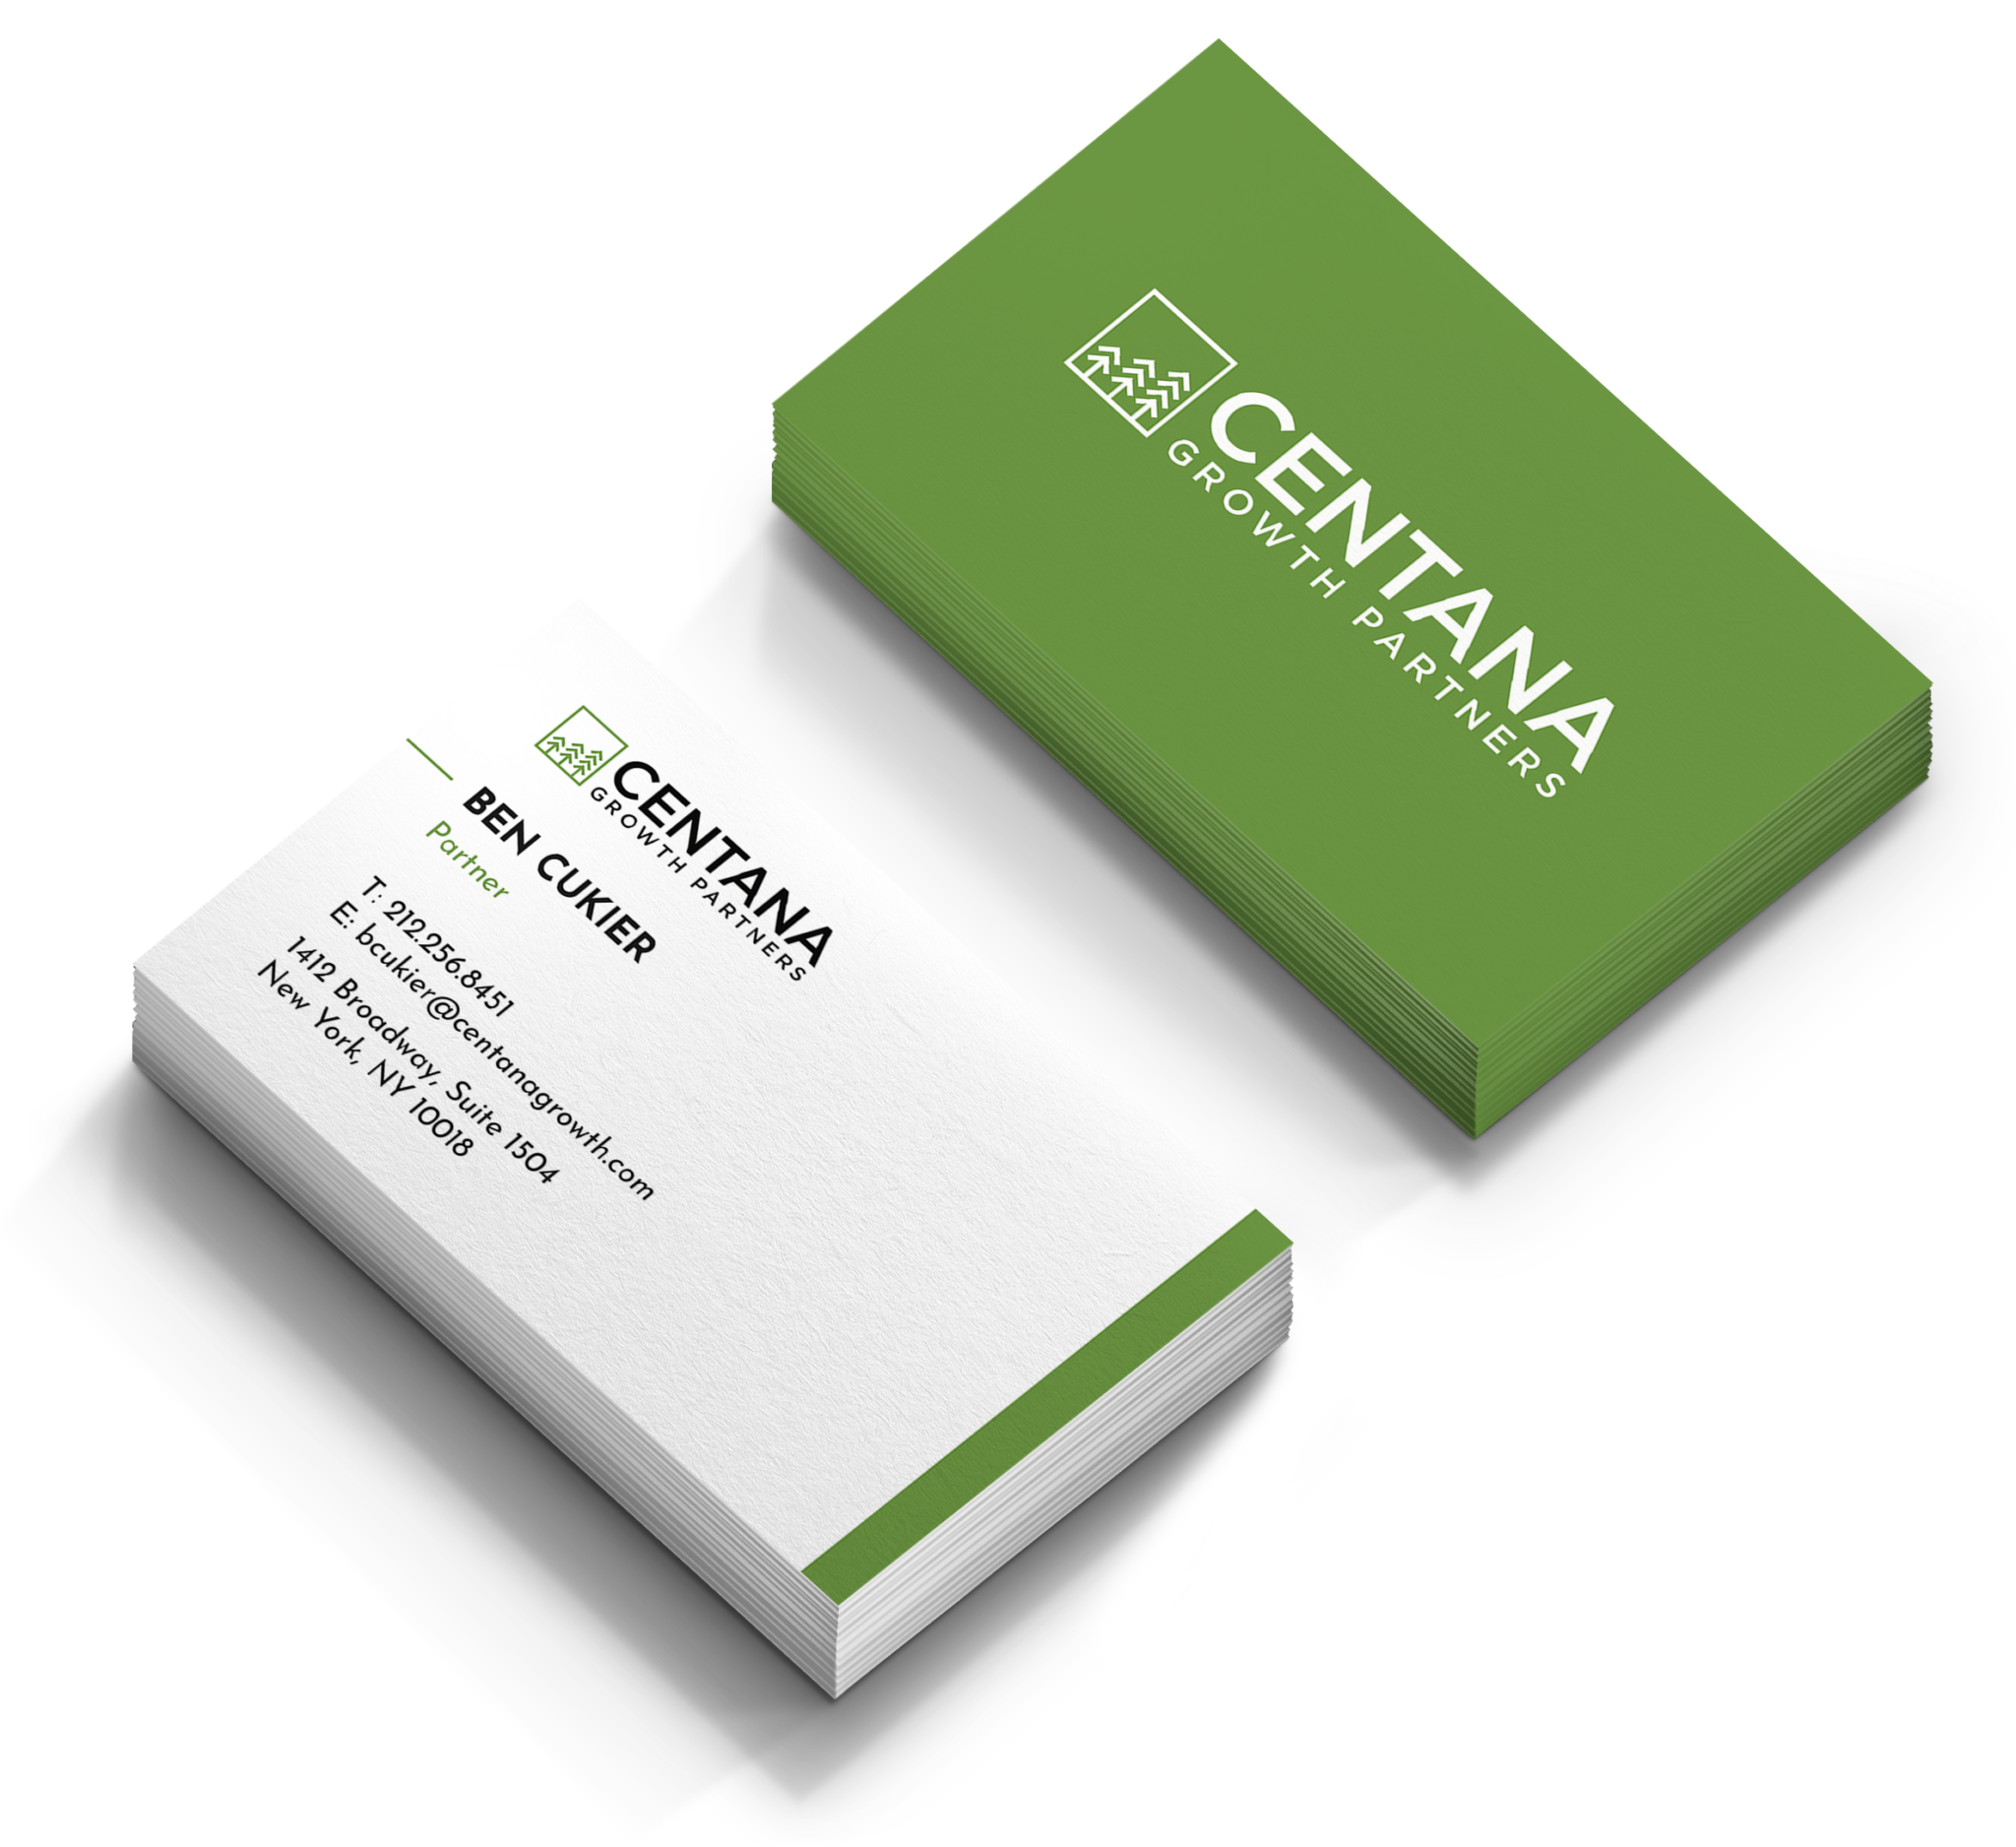 A mockup of the Centana rebranding, showing business cards.